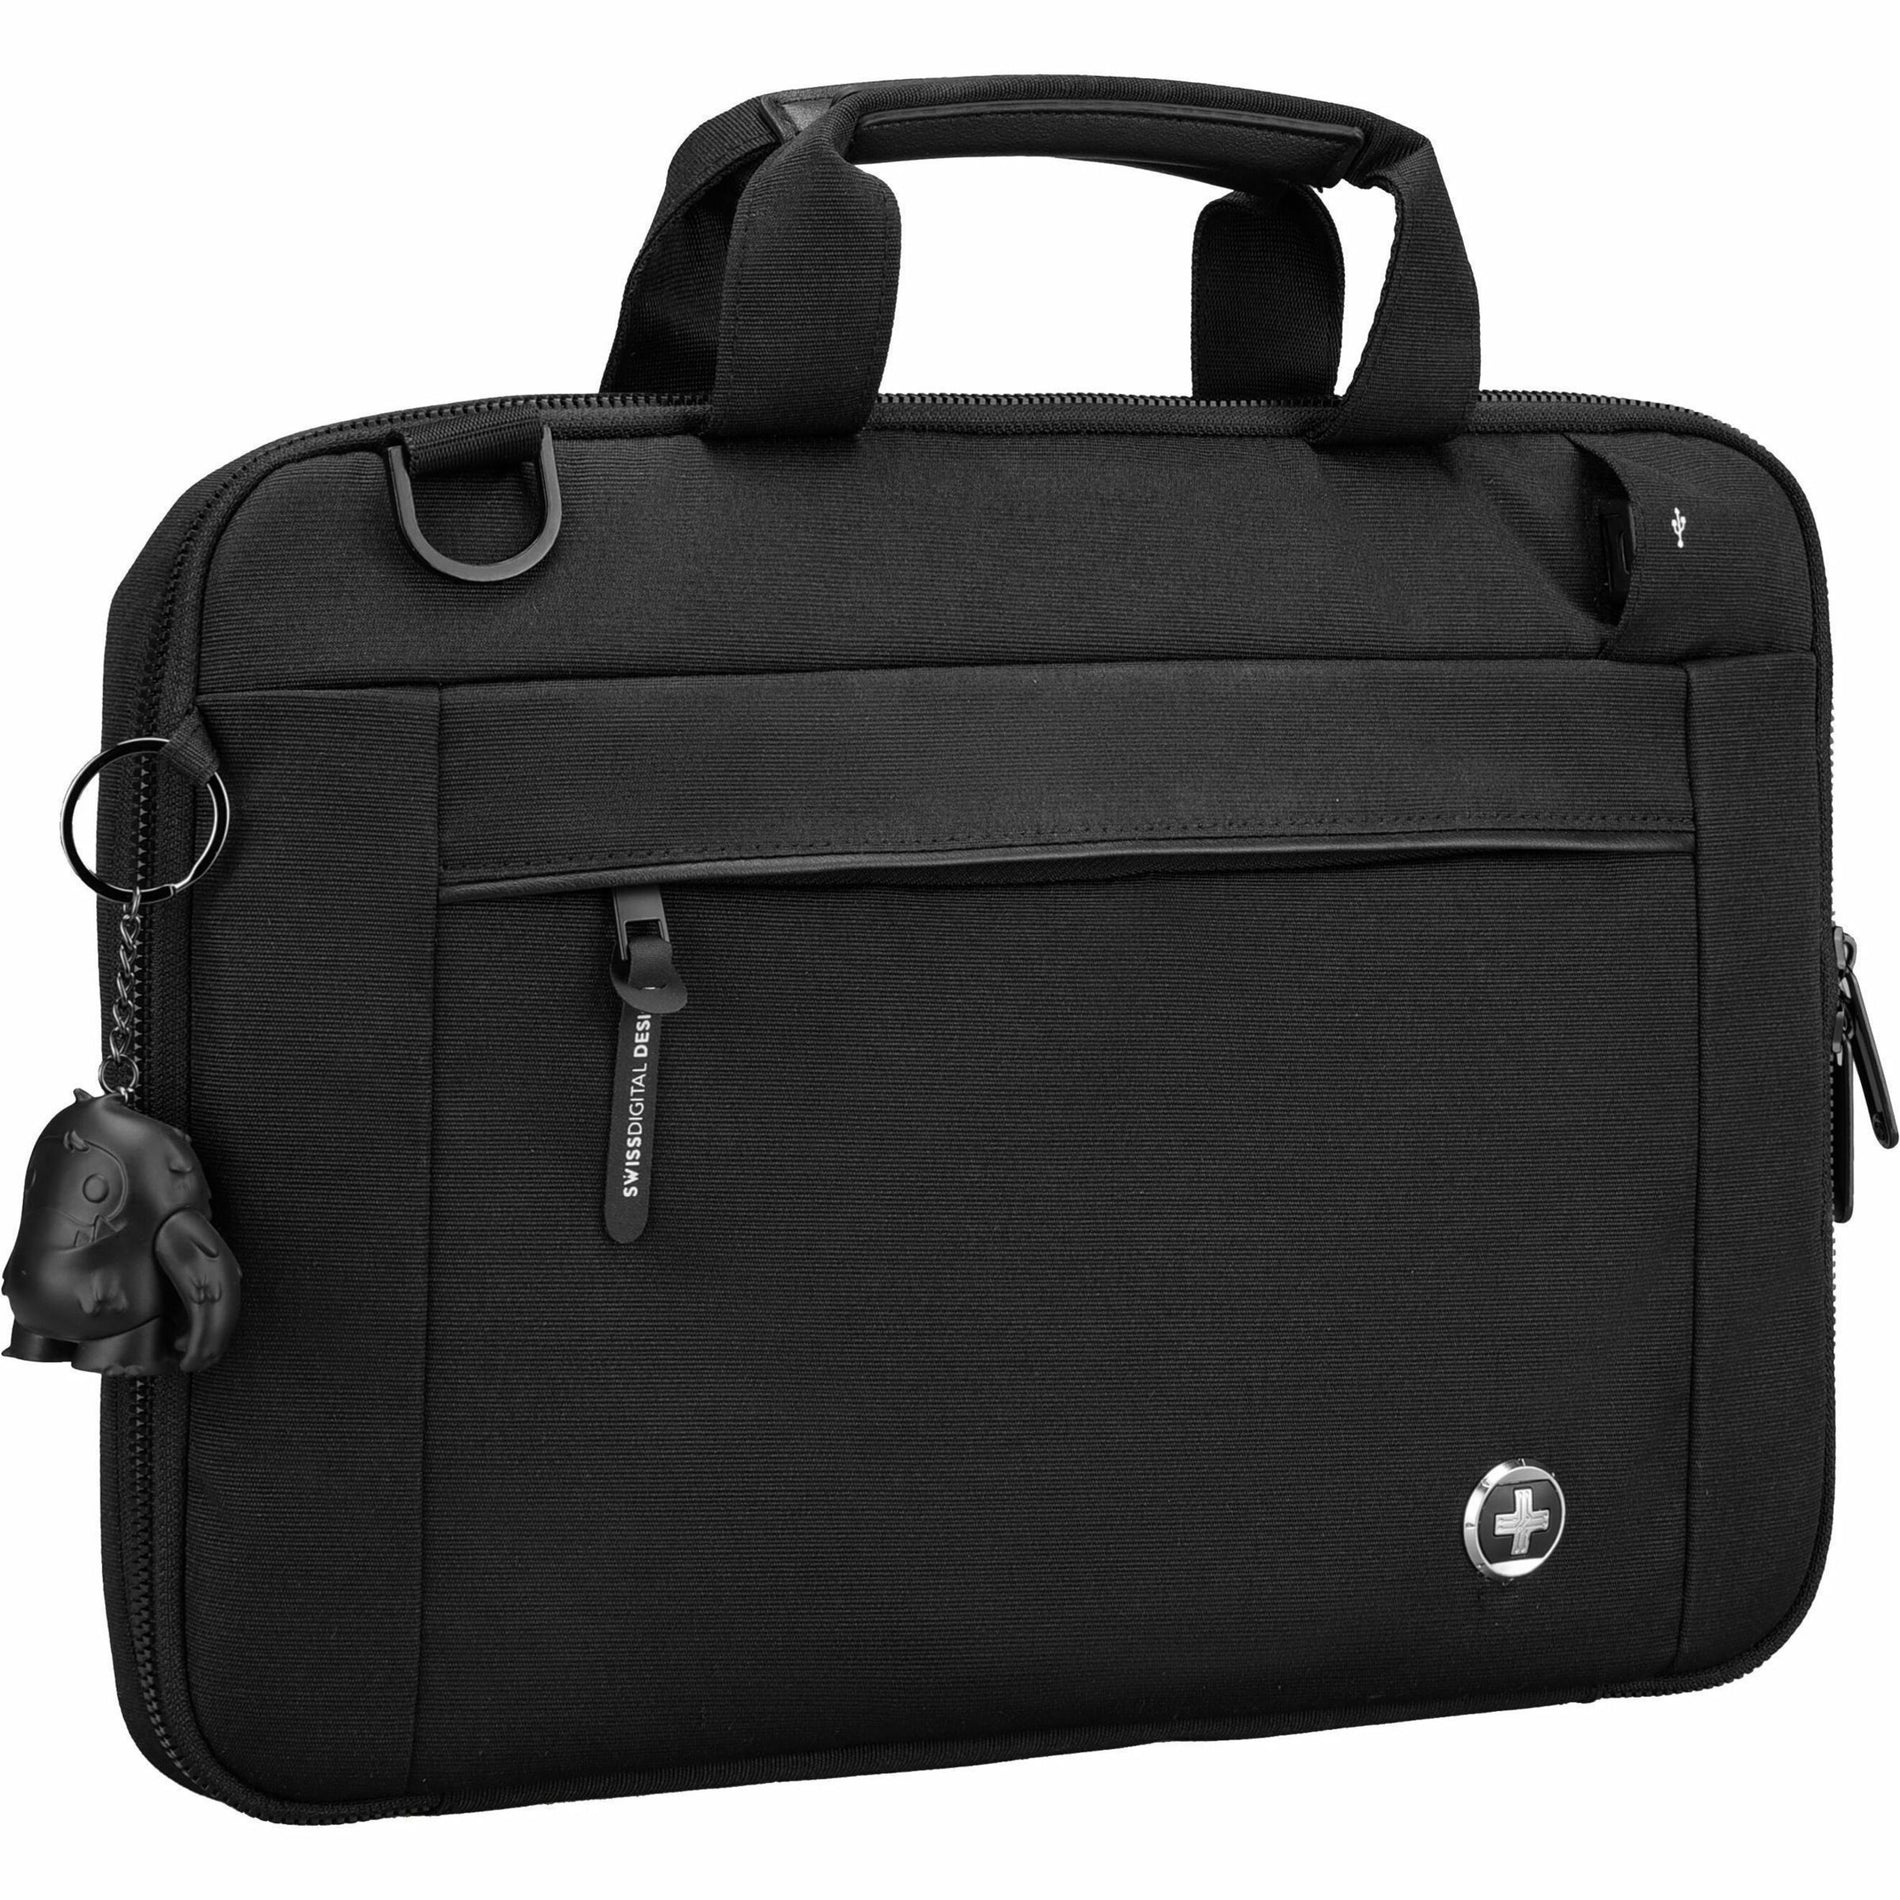 Swissdigital Design SD8525-01 Carrying Case, Sleeve for MacBook Pro, Tablet, Smartphone, and More